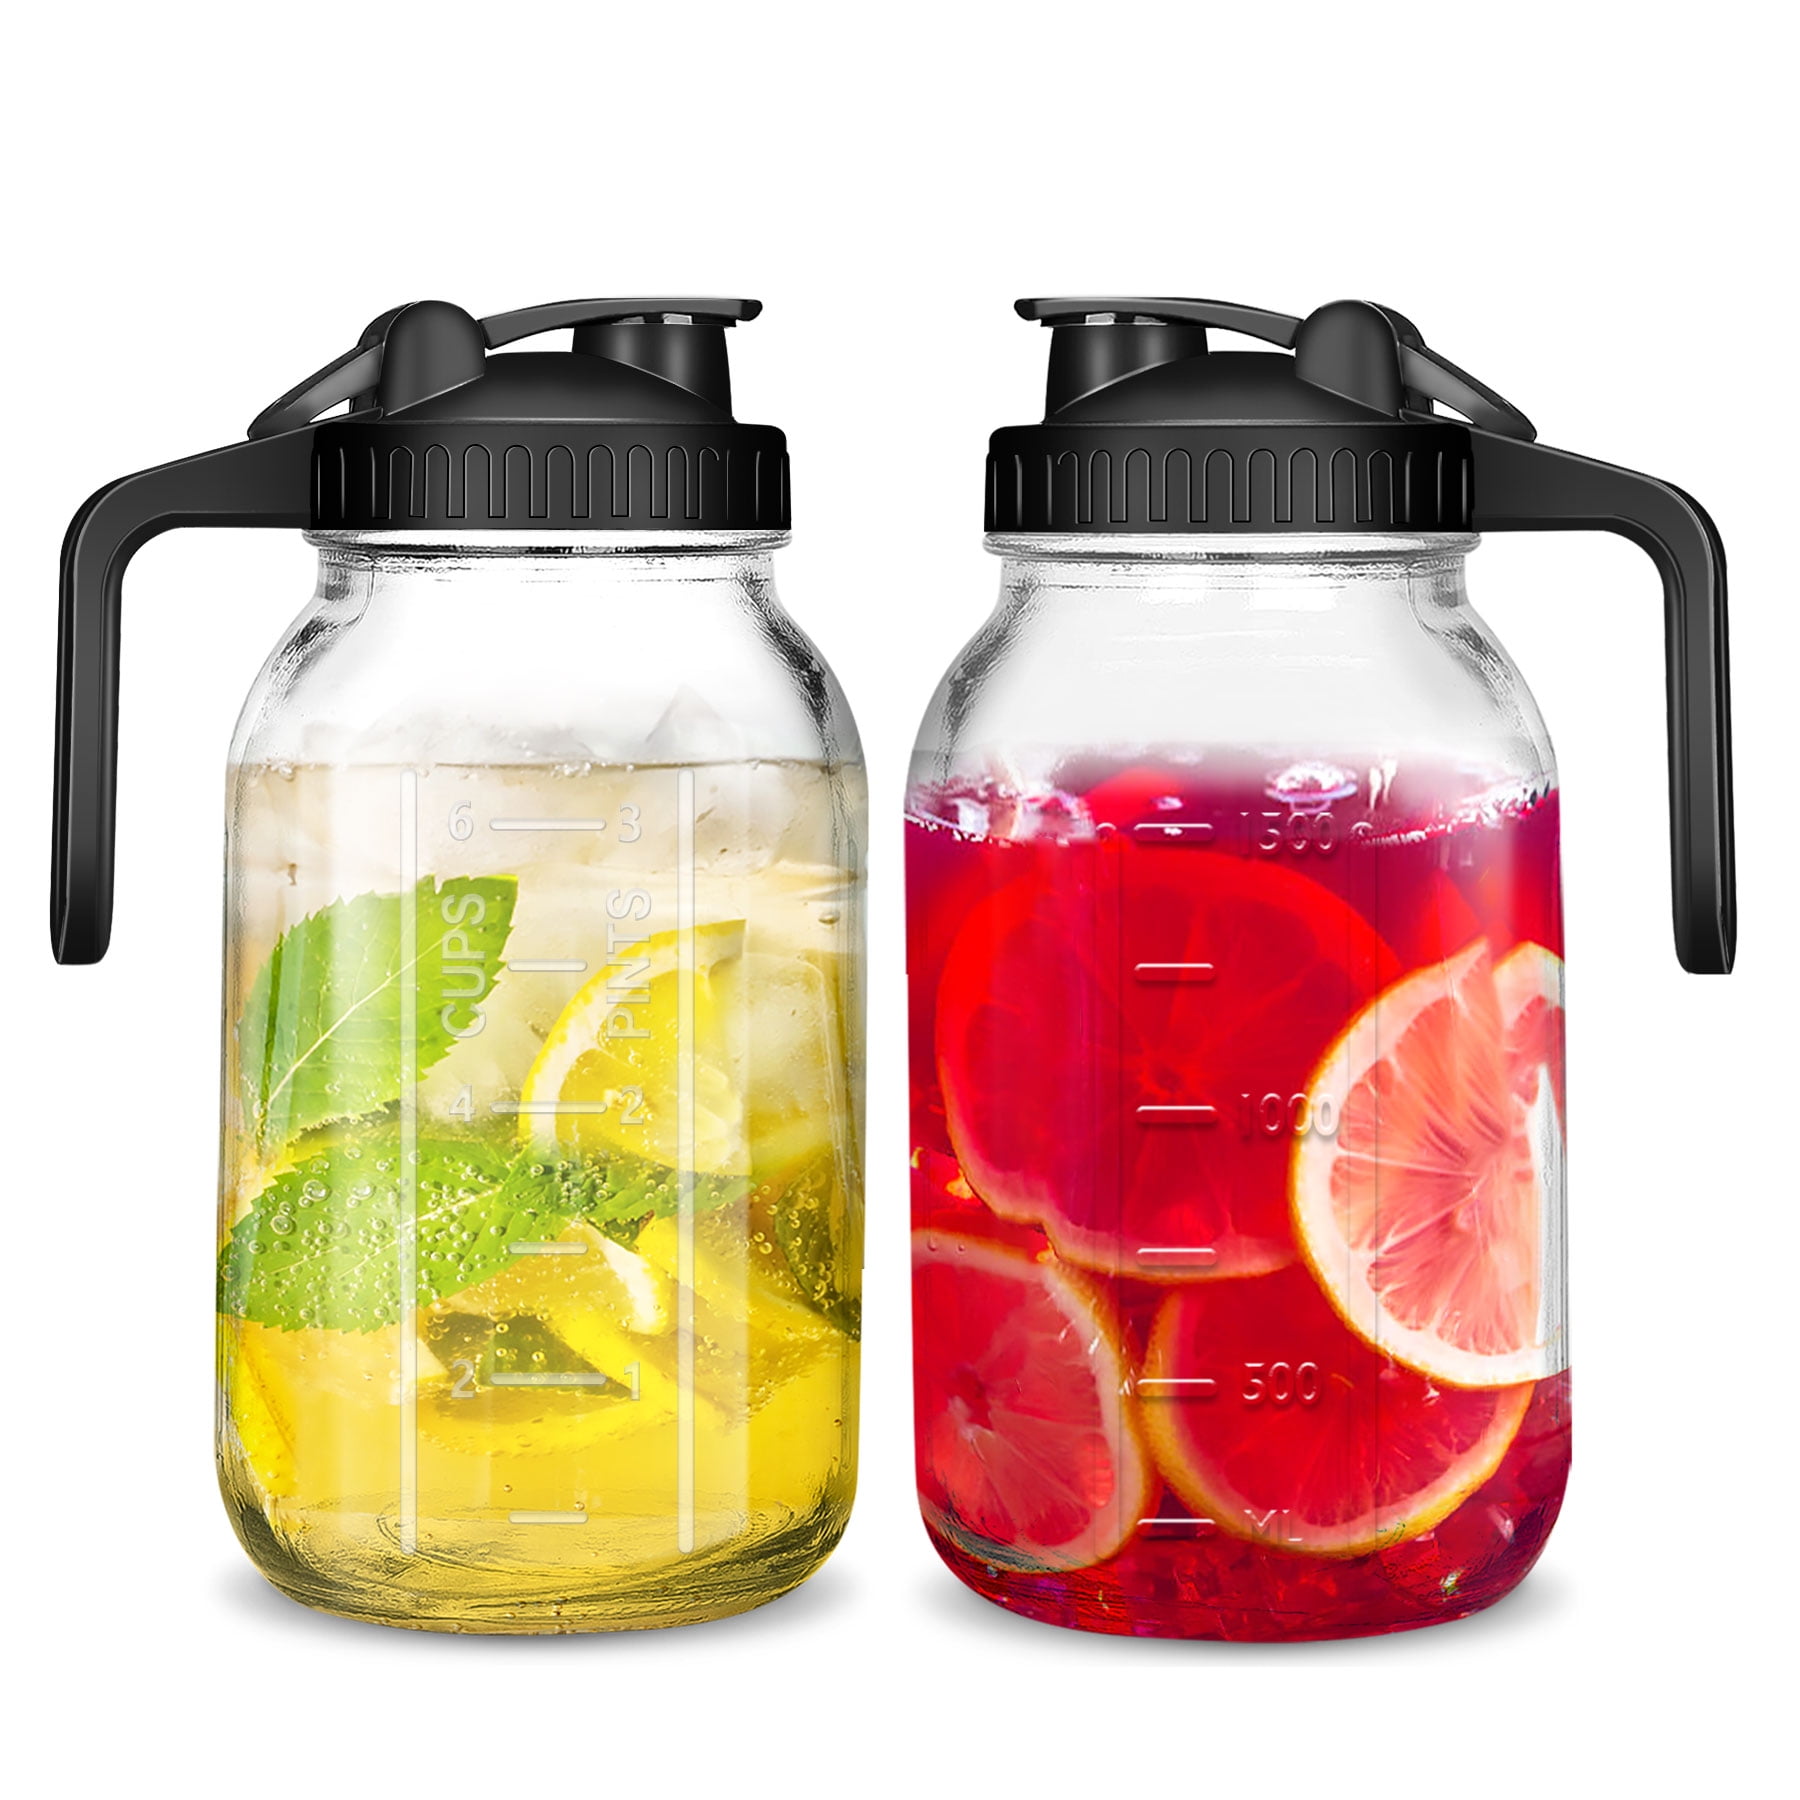 2Pcs Plastic Water Pitcher Clear Juice Containers with Flip Top lids -  Narrow Neck for Easy Grip Wide Mouth - Juice carafe for Iced Tea, Powdered